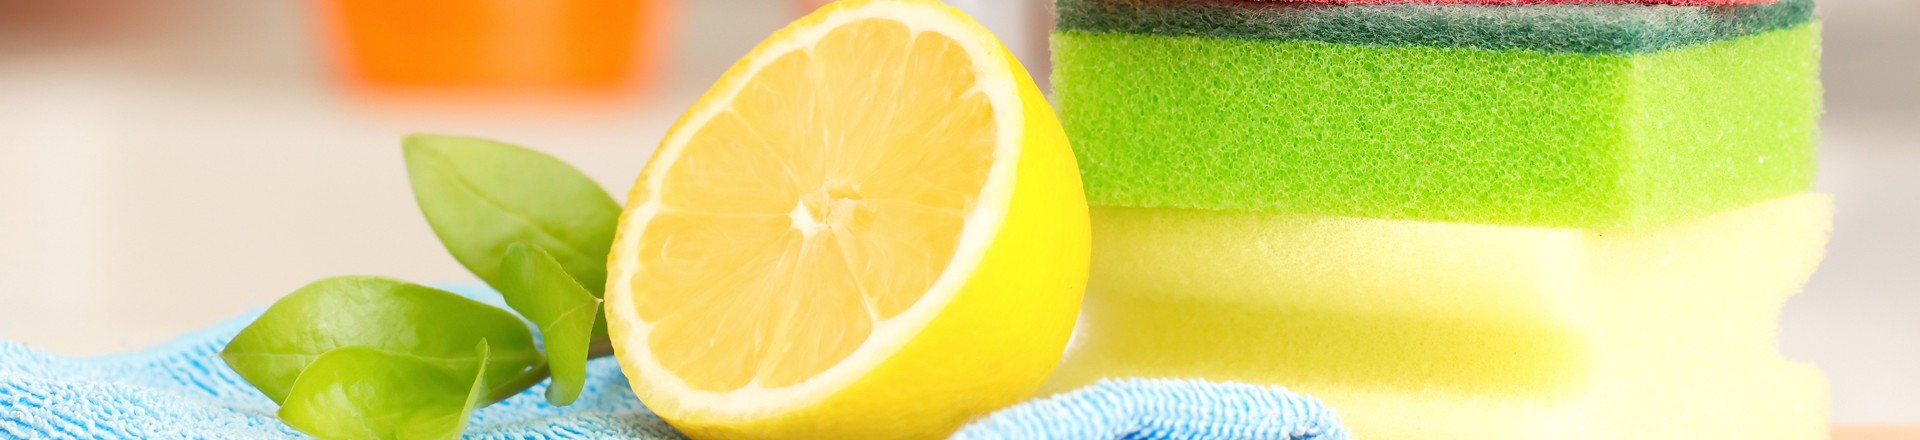 non-toxic cleaning alternatives